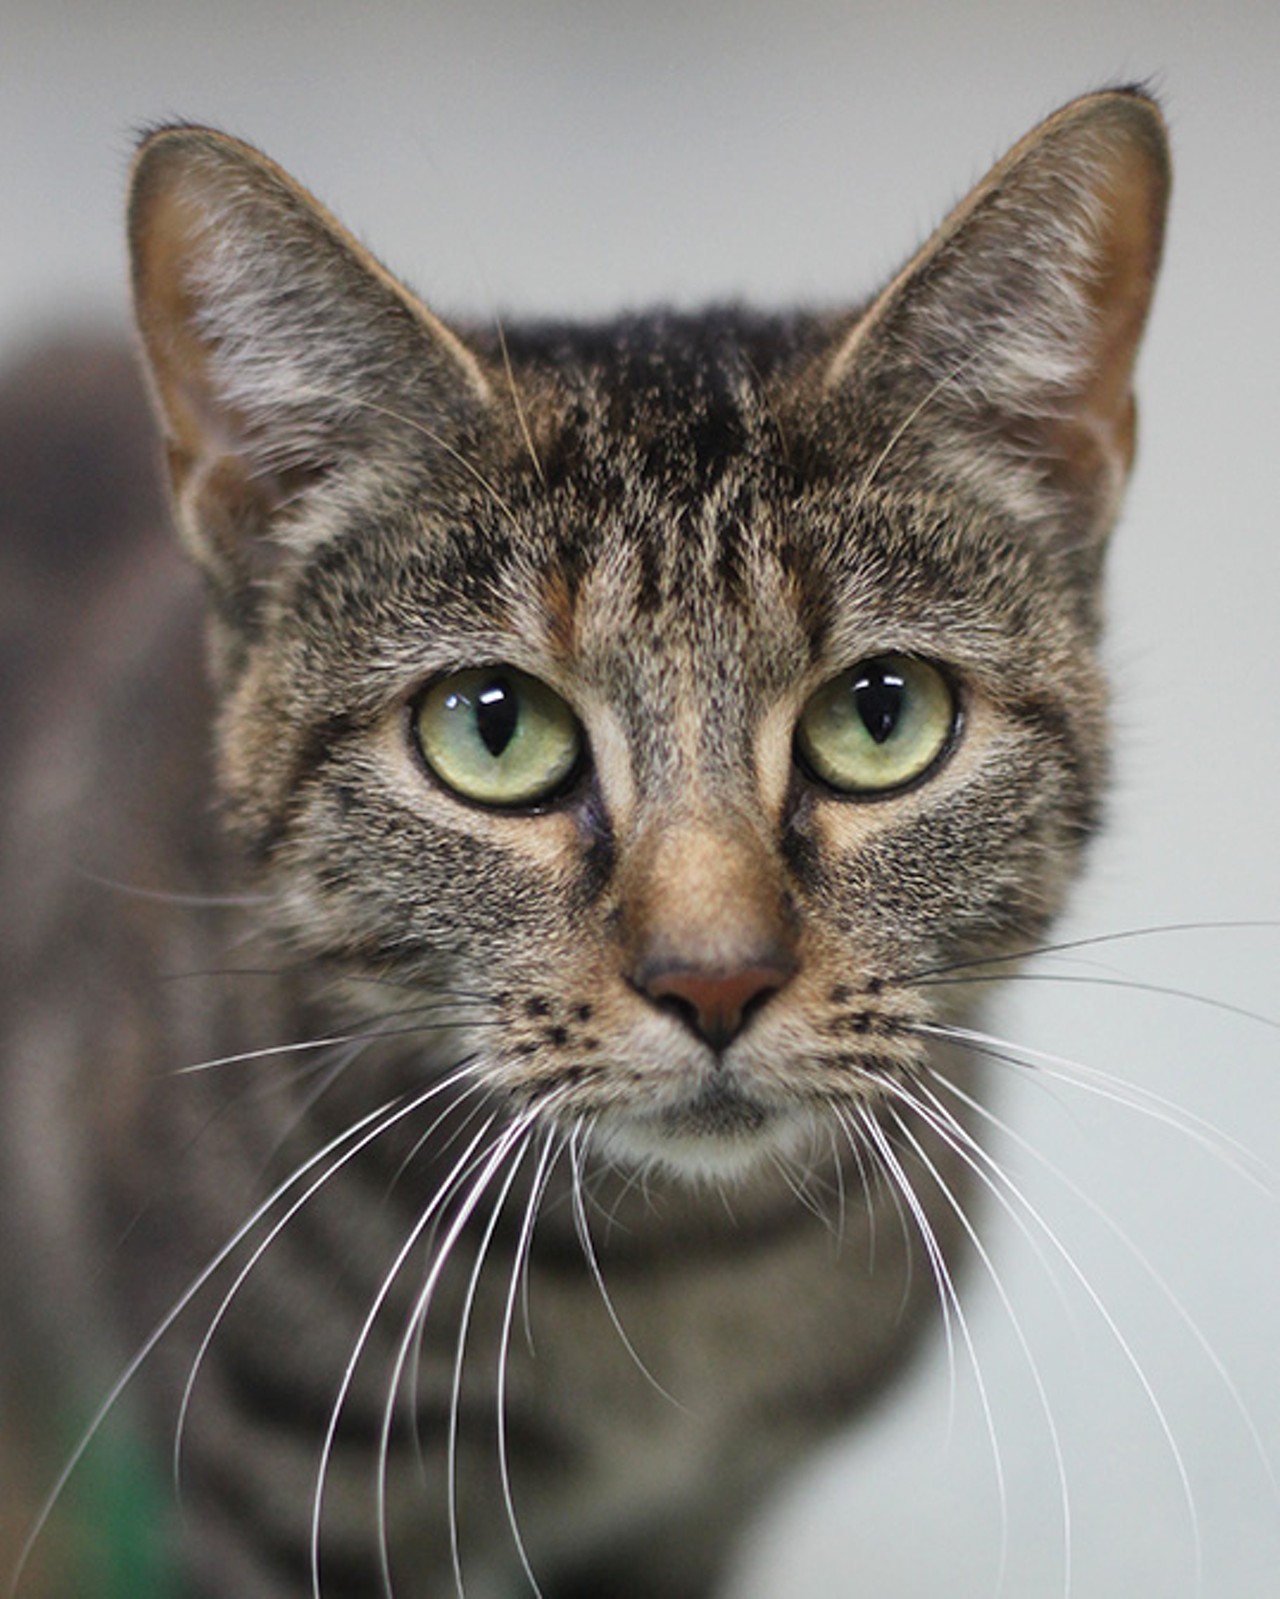 Gina
"I&#146;m a friendly tabby with a playful personality! I like to play with toys and have my head rubbed. I&#146;ll be sweet to you so that you can shower me with attention. I hope you&#146;ll give me a chance and visit me so that you can get to know me better. I&#146;m sure that I&#146;ll quickly win your heart over!"